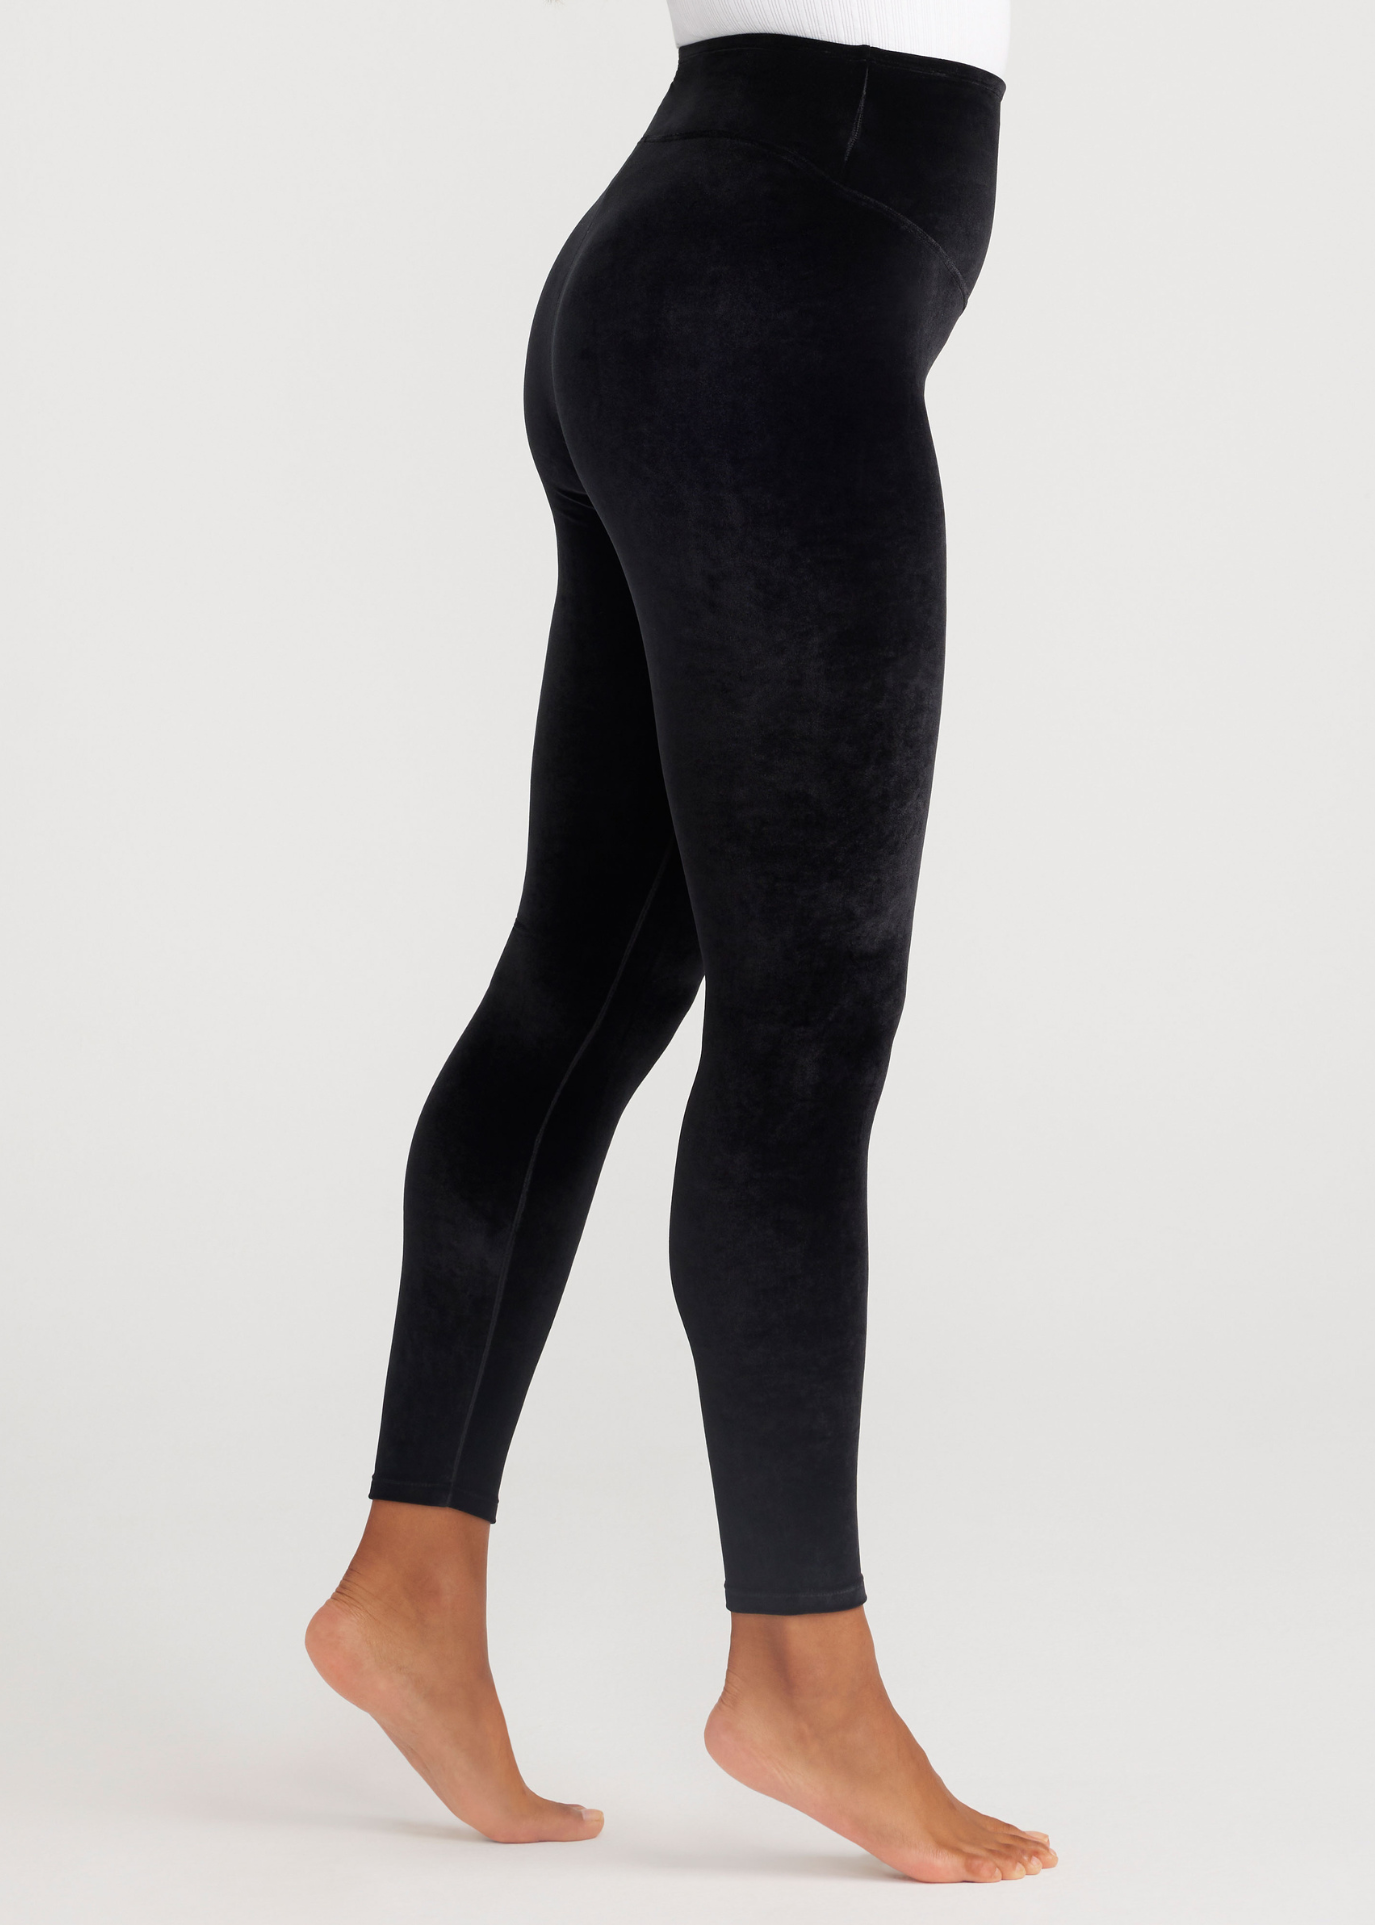 Yummie Just Launched New Leggings And They Are *So* Comfortable–Use This  Code To Get A Pair For 20% Off - SHEfinds